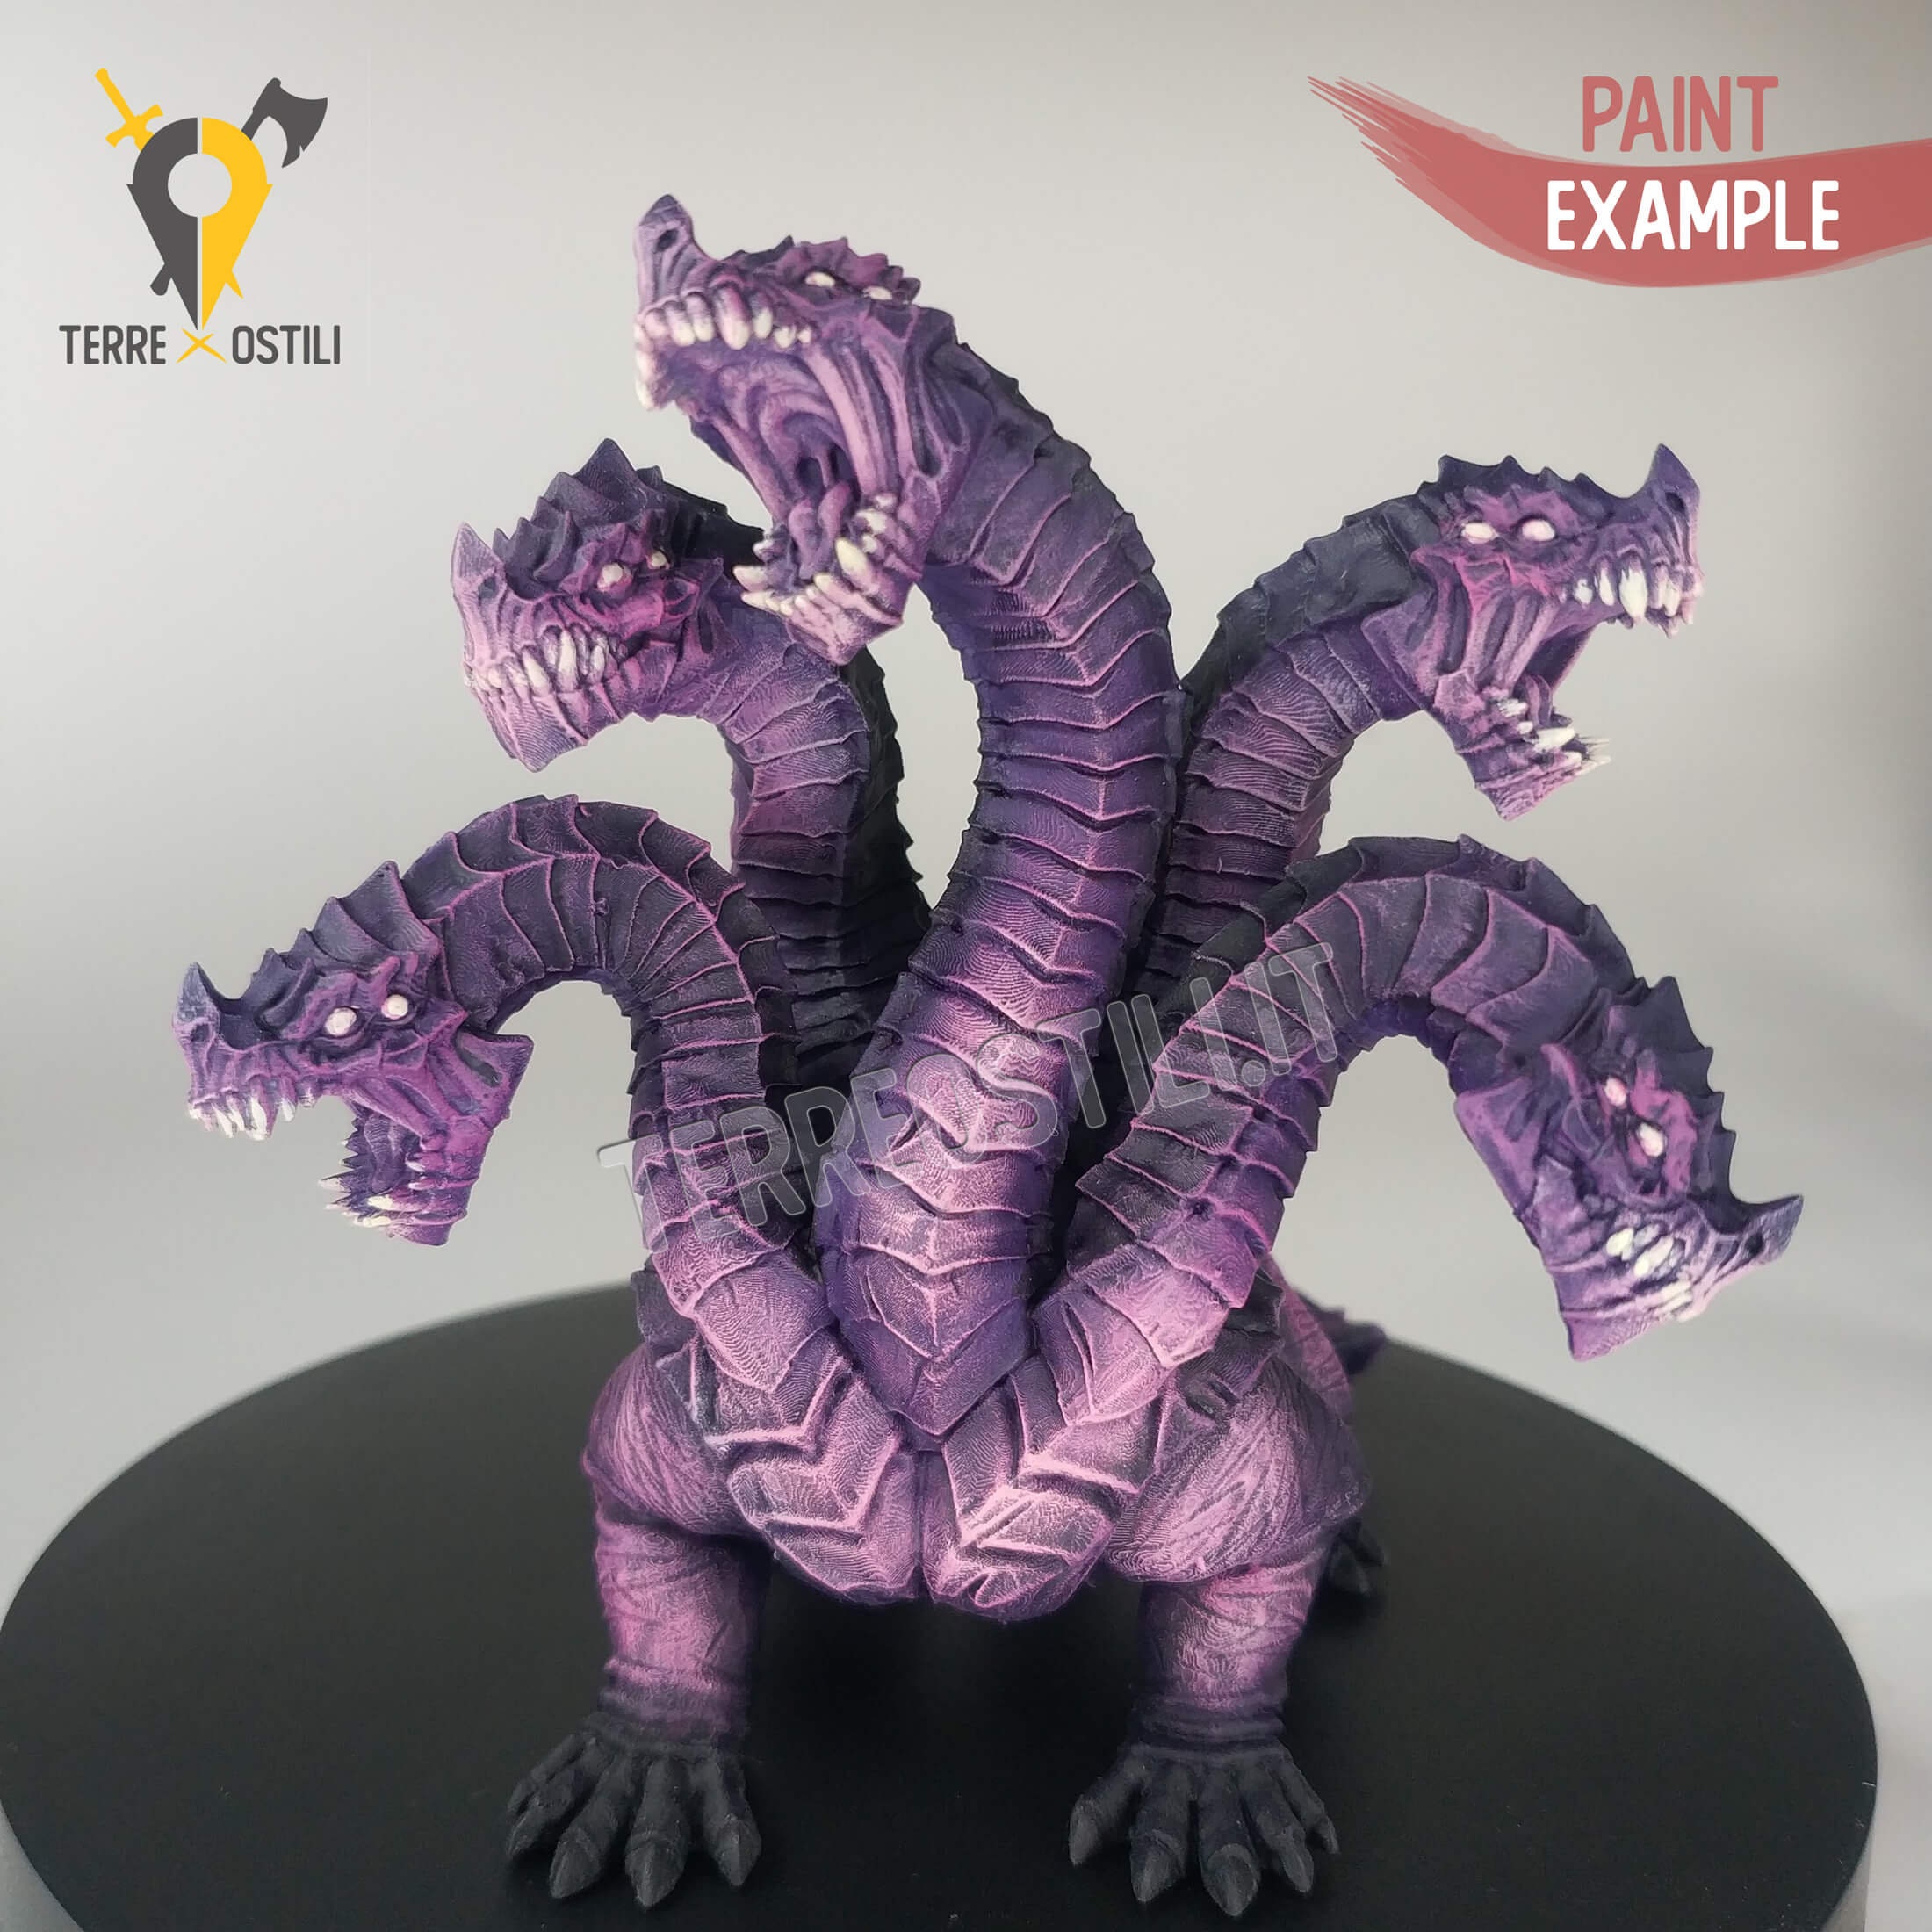 Serpente Gigante Cobra Miniature 3d Compatible With Dungeons 